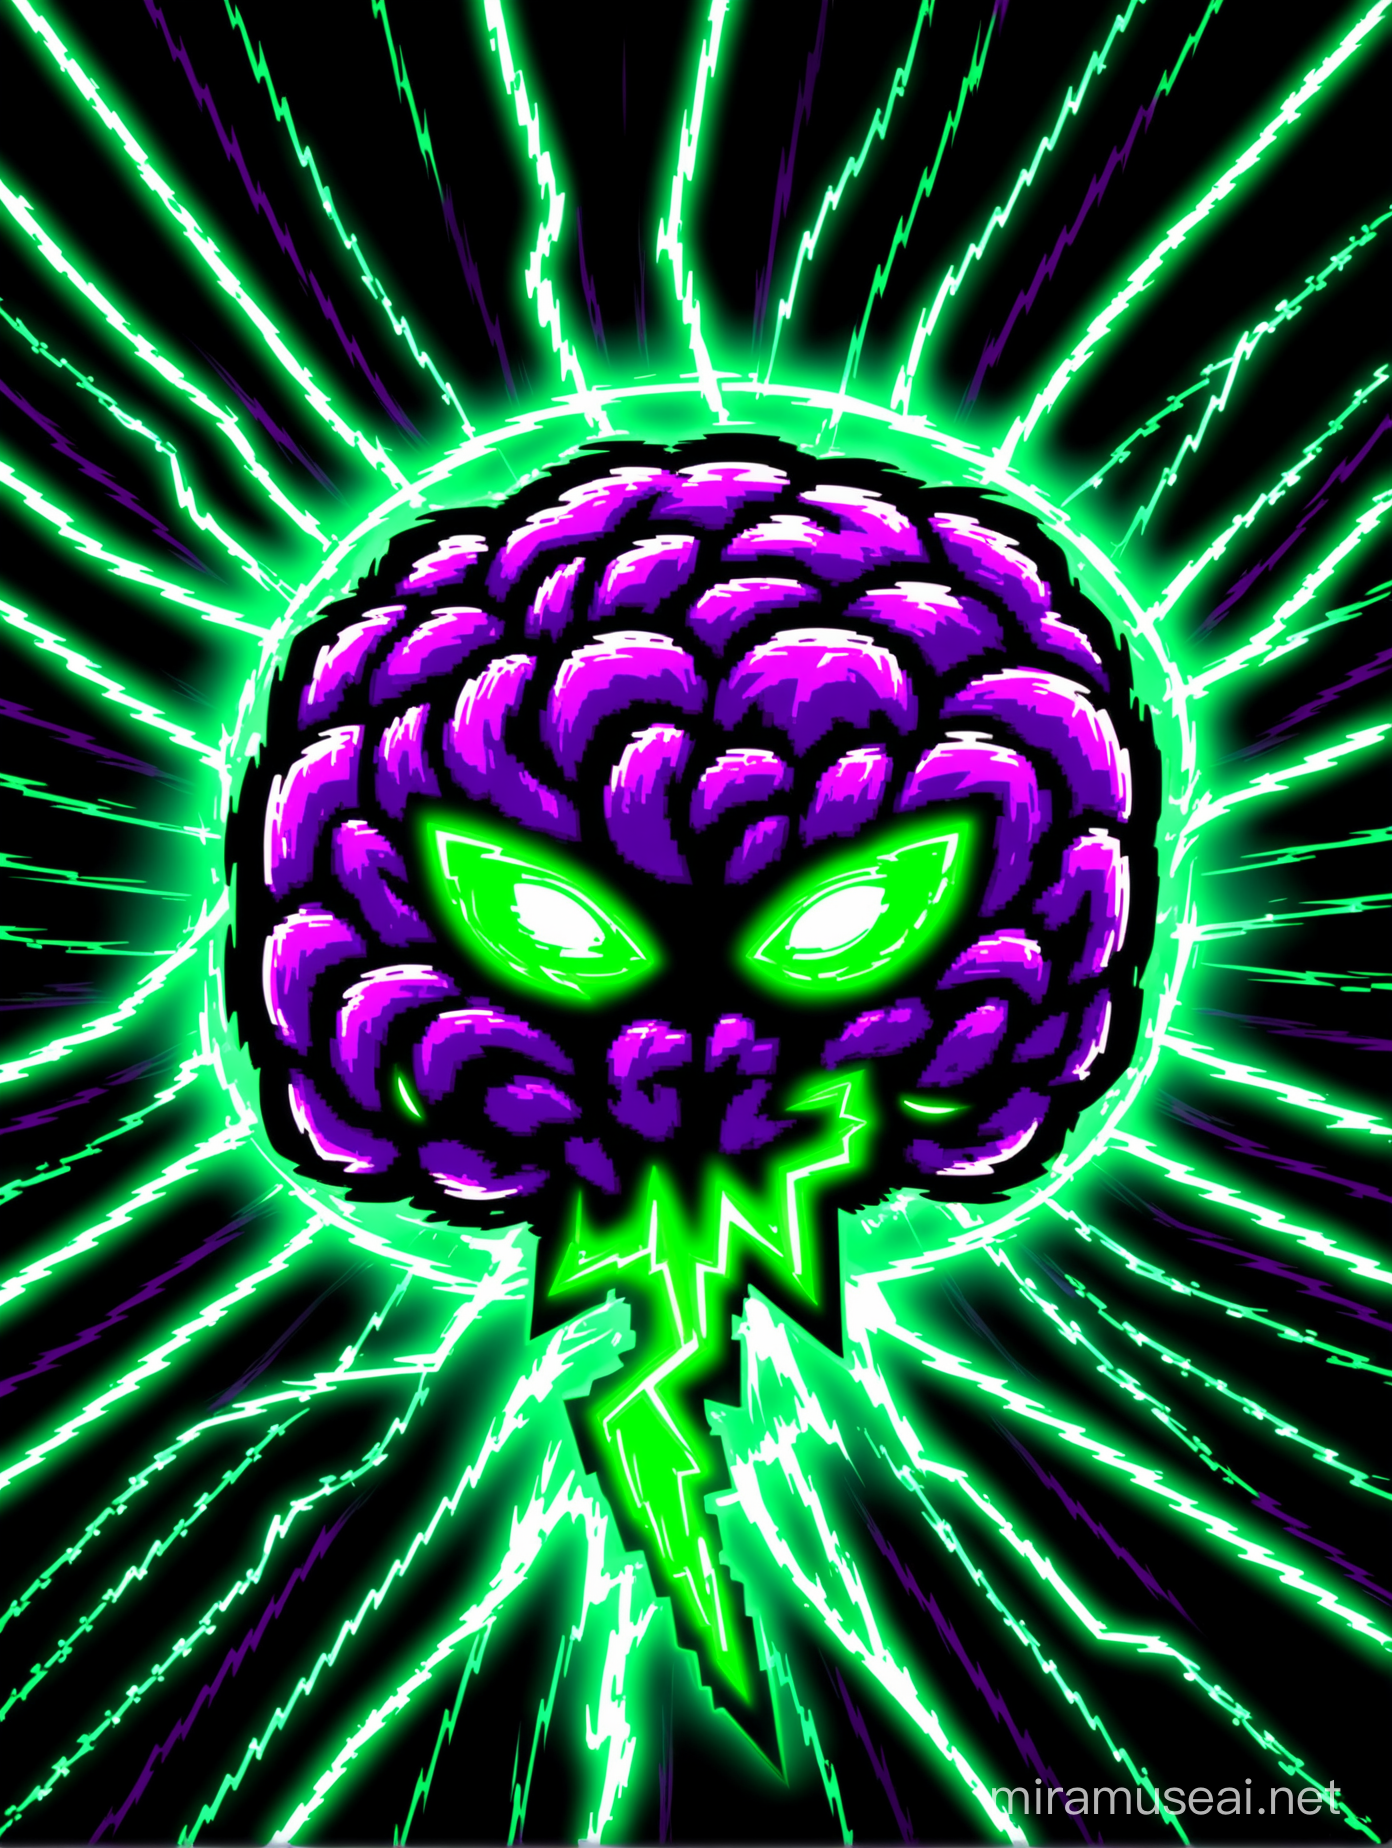 Neon green MEGA LIGHTNING-THUNDER brain in a black background with green lighting, there's some purple energy too but only in small amounts 